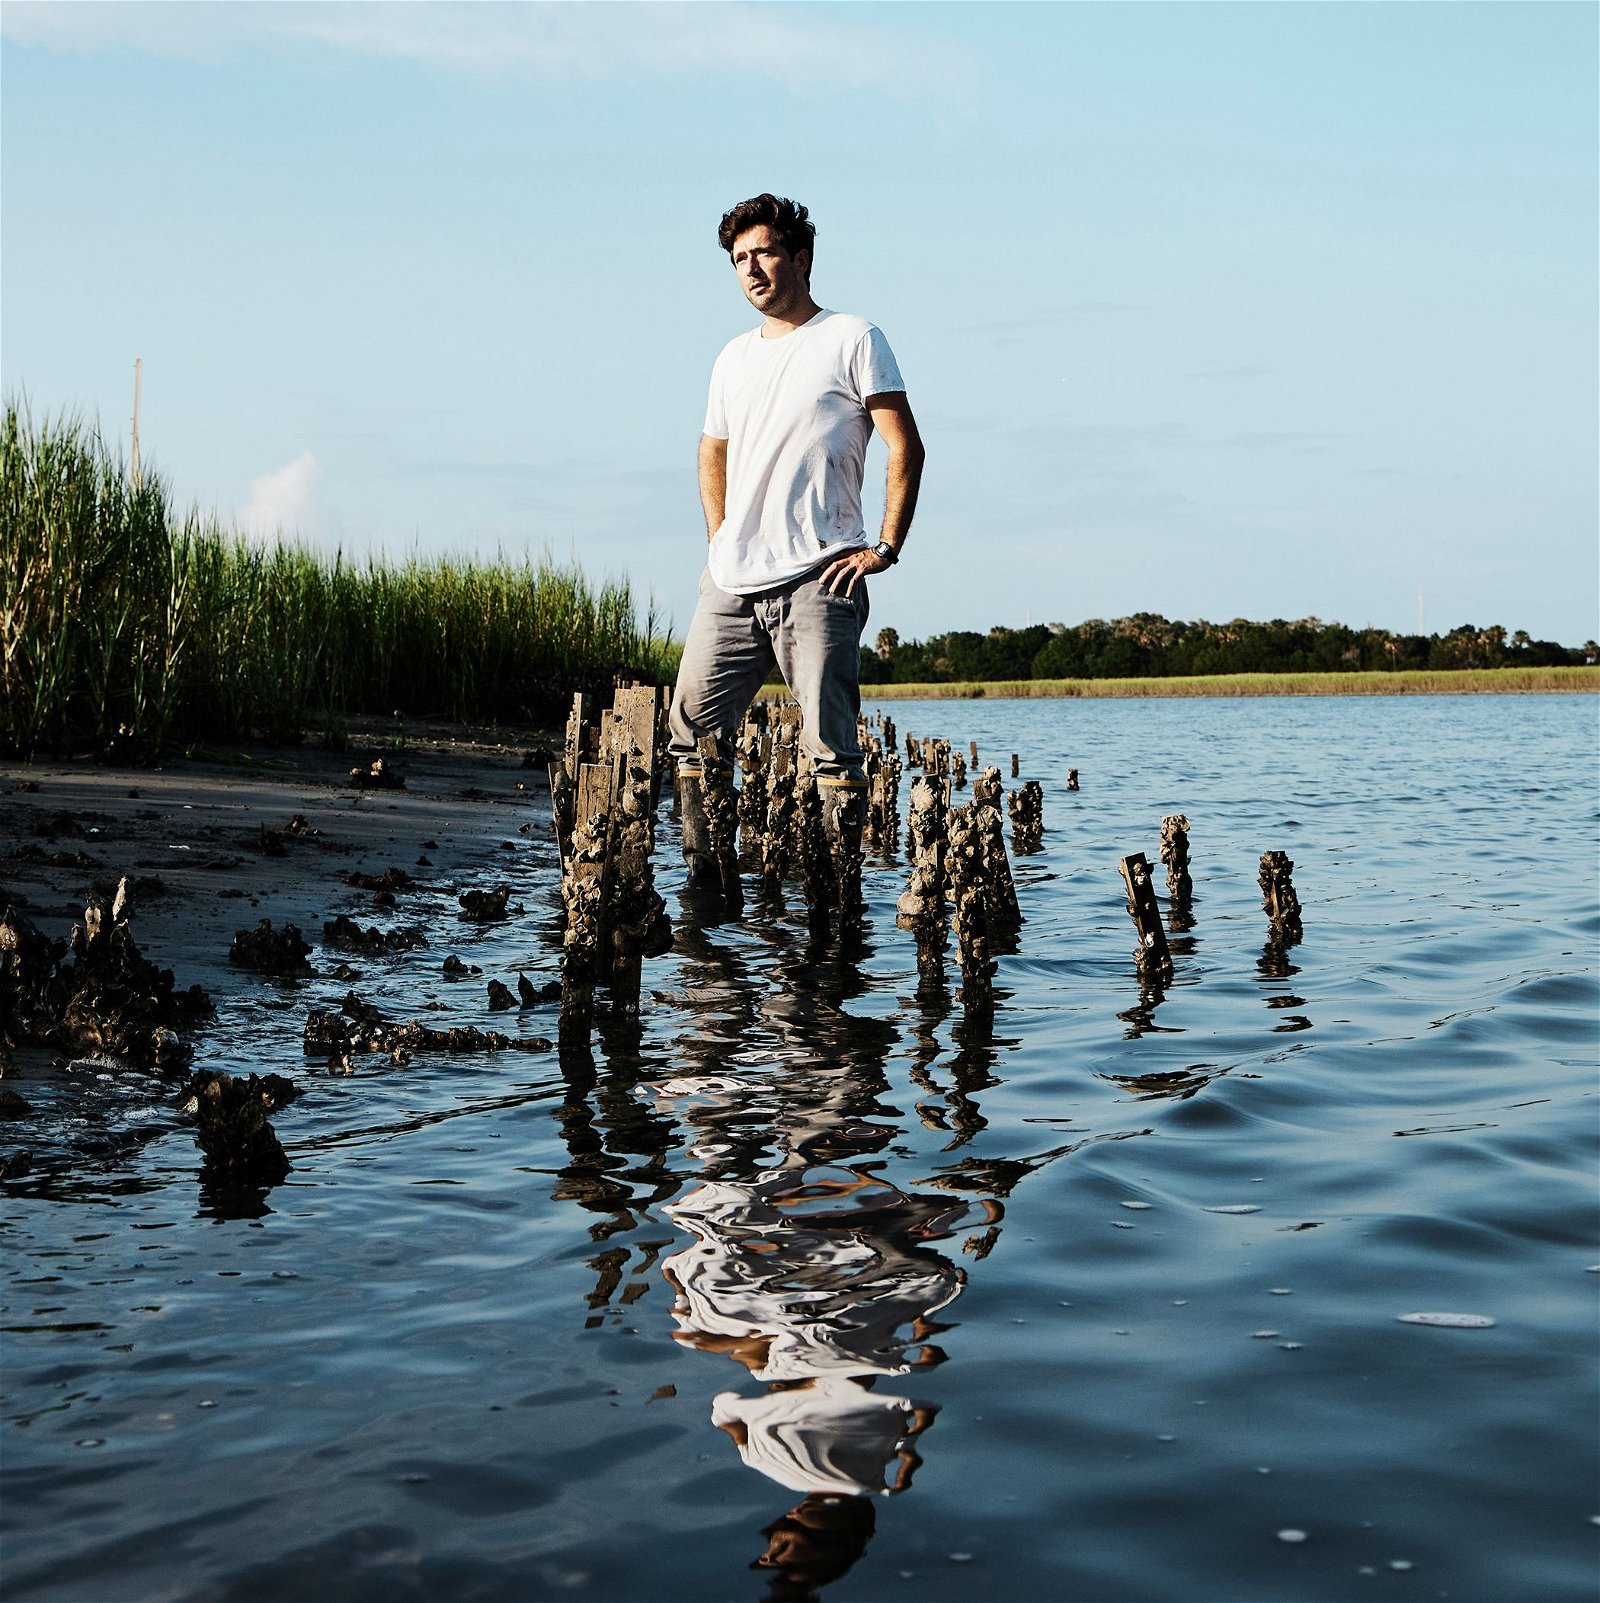 What It's Like Being an Oysterman (The Pay Sucks But You're Saving the Planet)